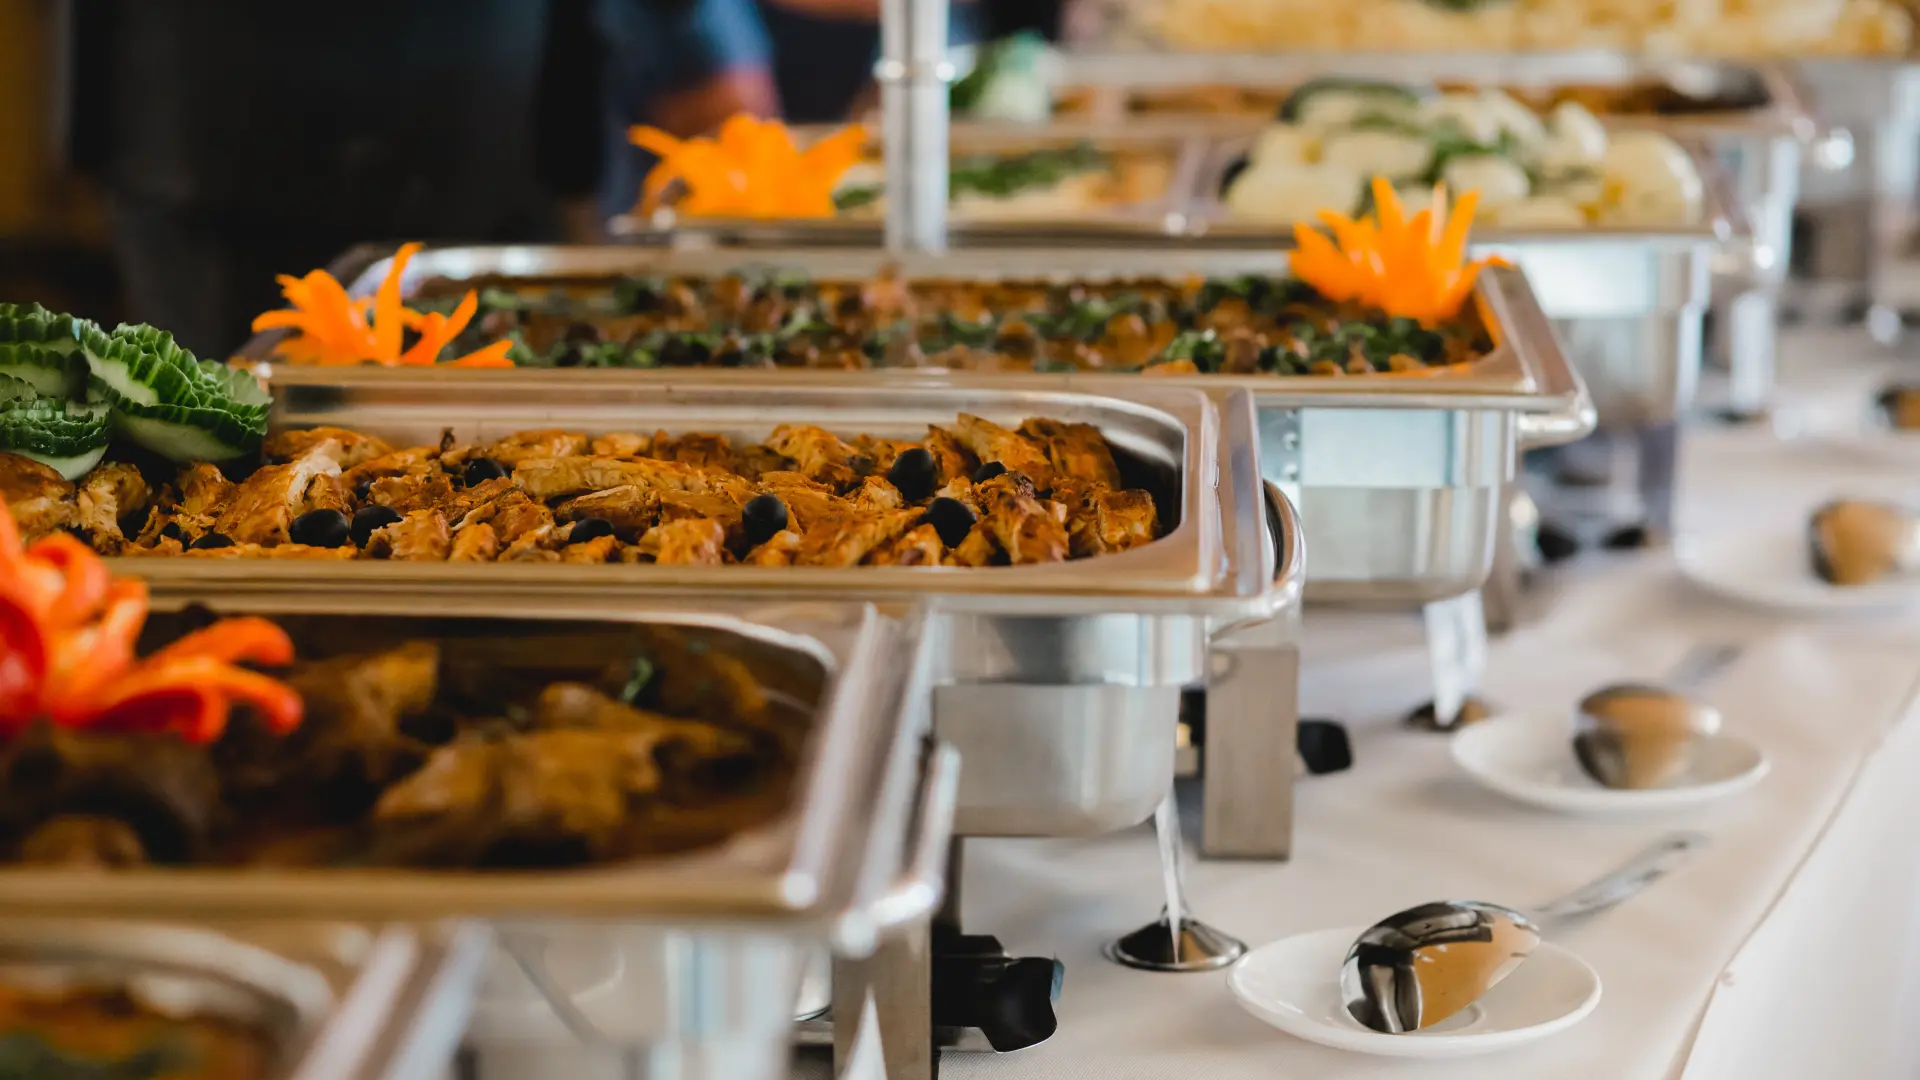 Chafing dish in a catering service